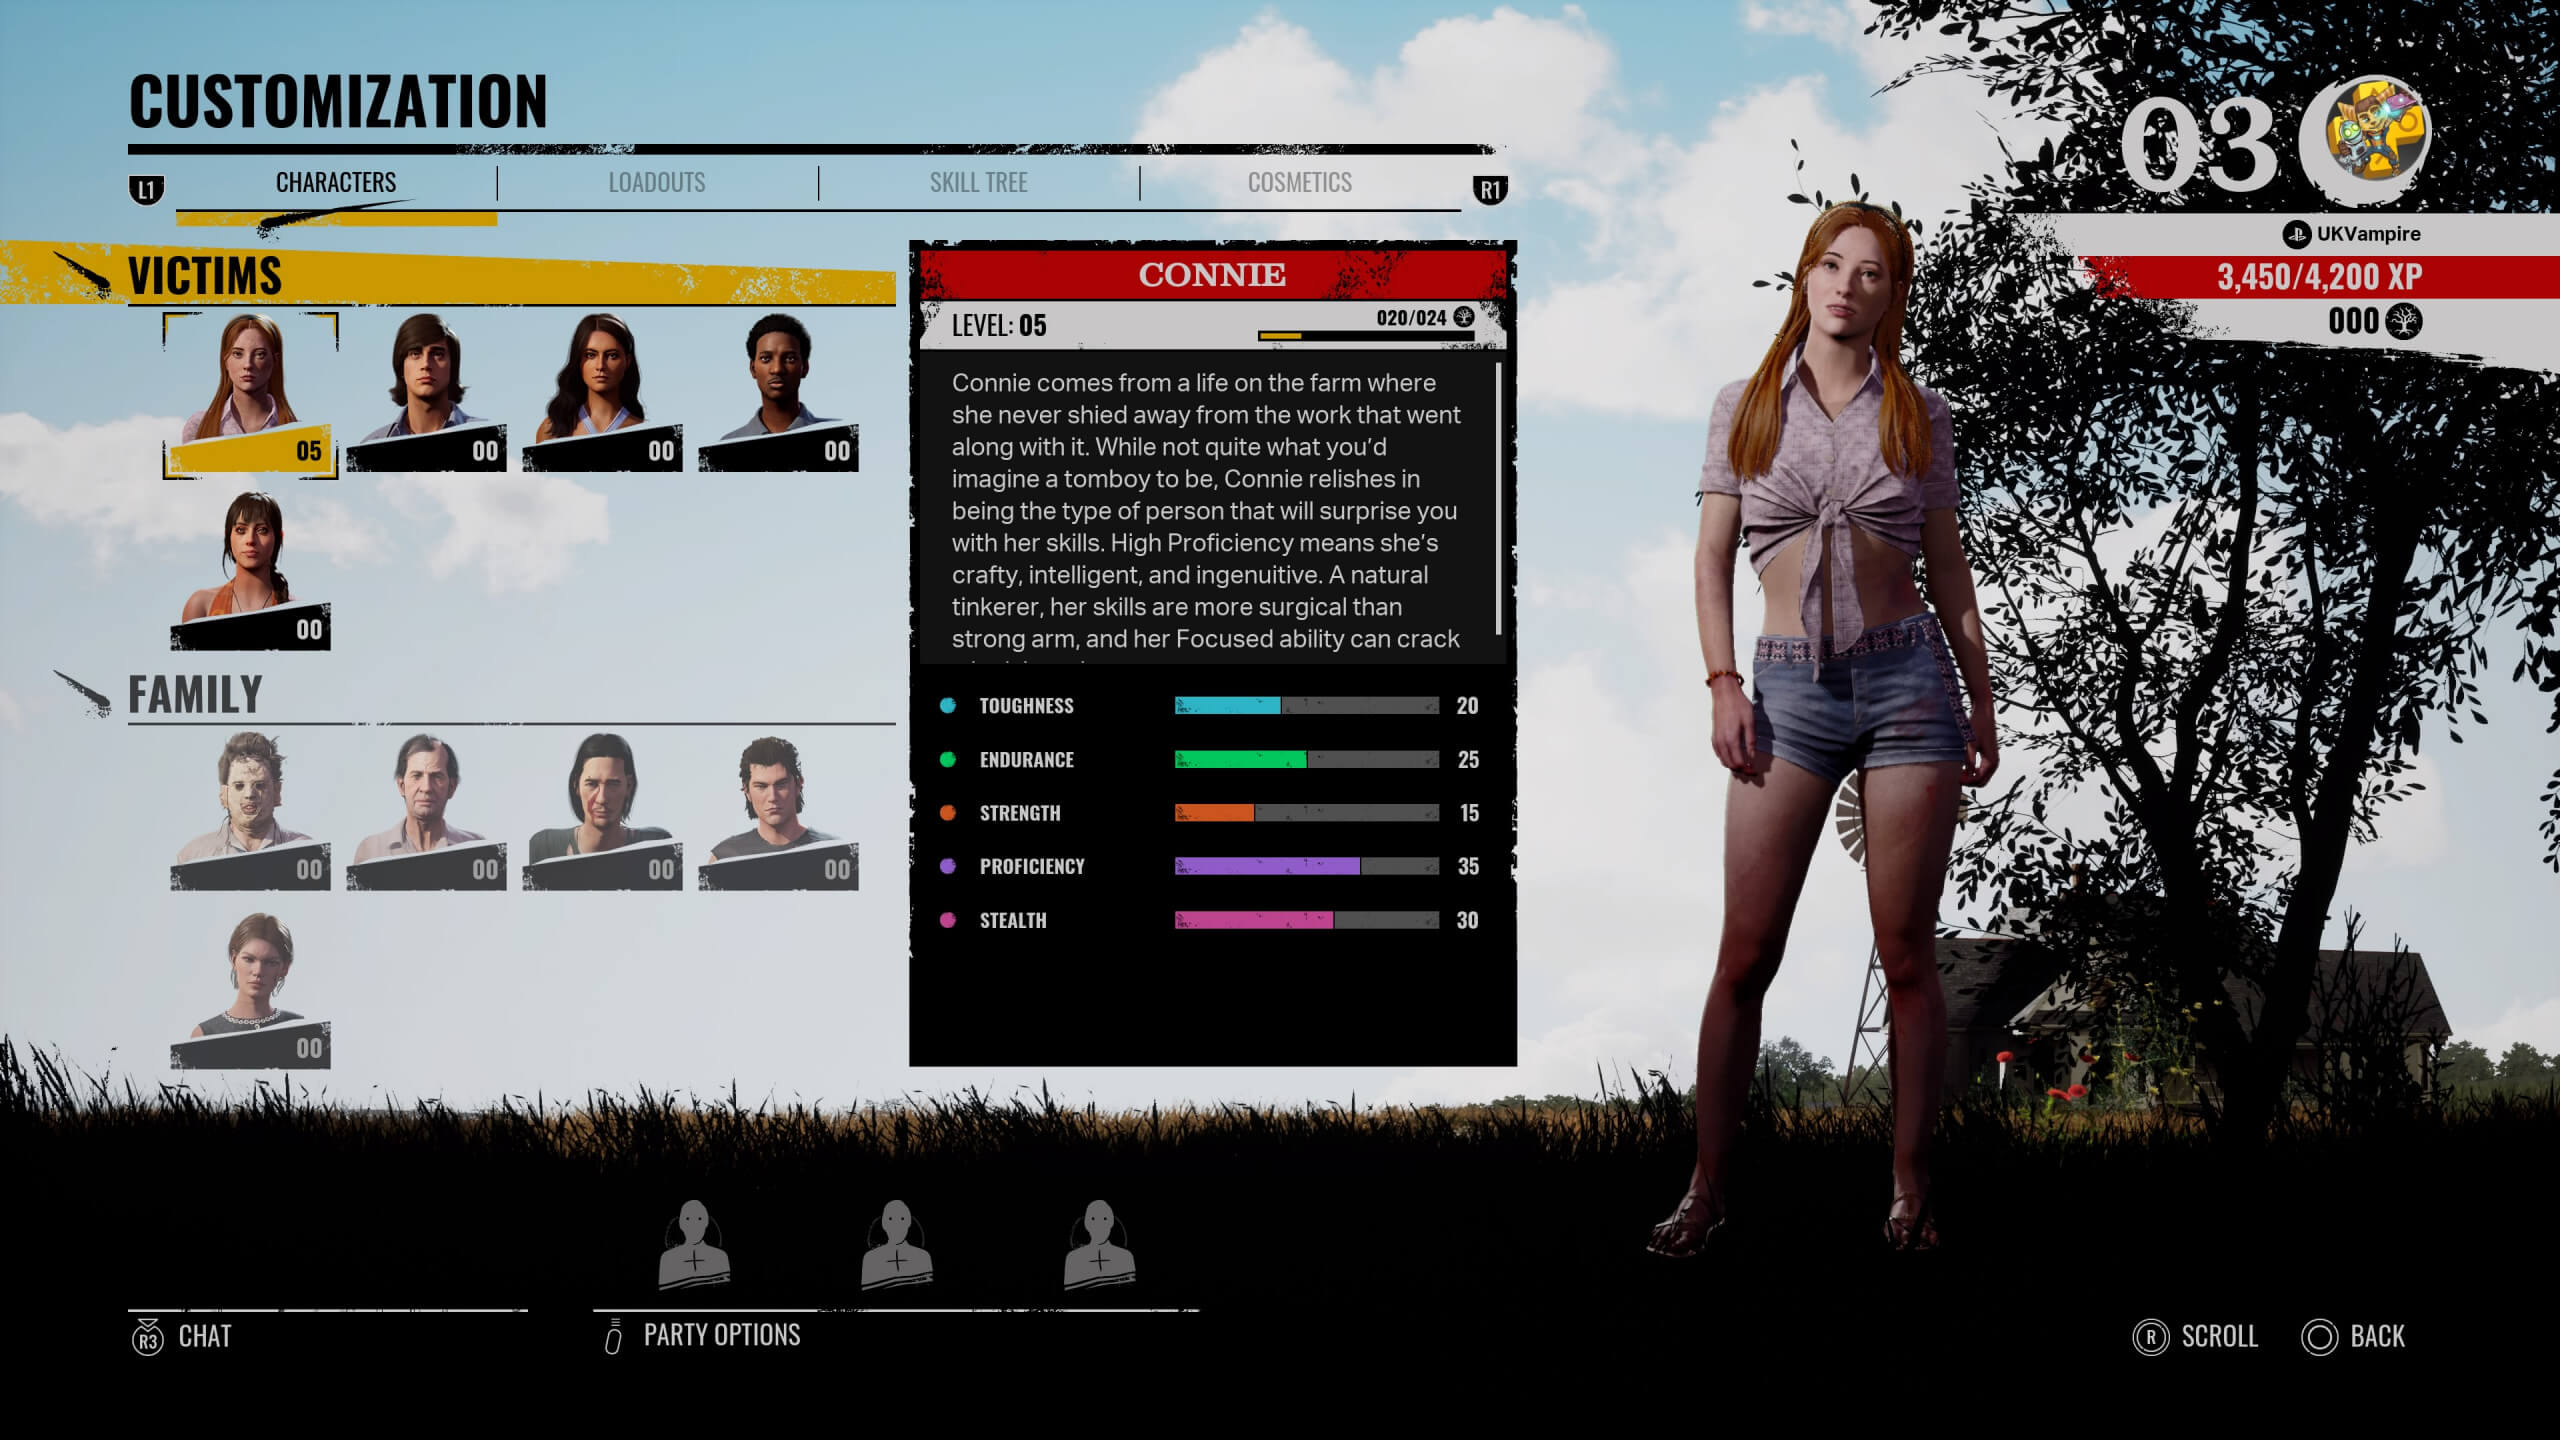 The character screen for Texas Chainsaw Massacre, this shows the stats for Connie. The stats include Toughness, Endurance, Strength, Profeciancy and Stealth. It shows the characters level and the current XP. A picture of Connie is to the right of the stats window.